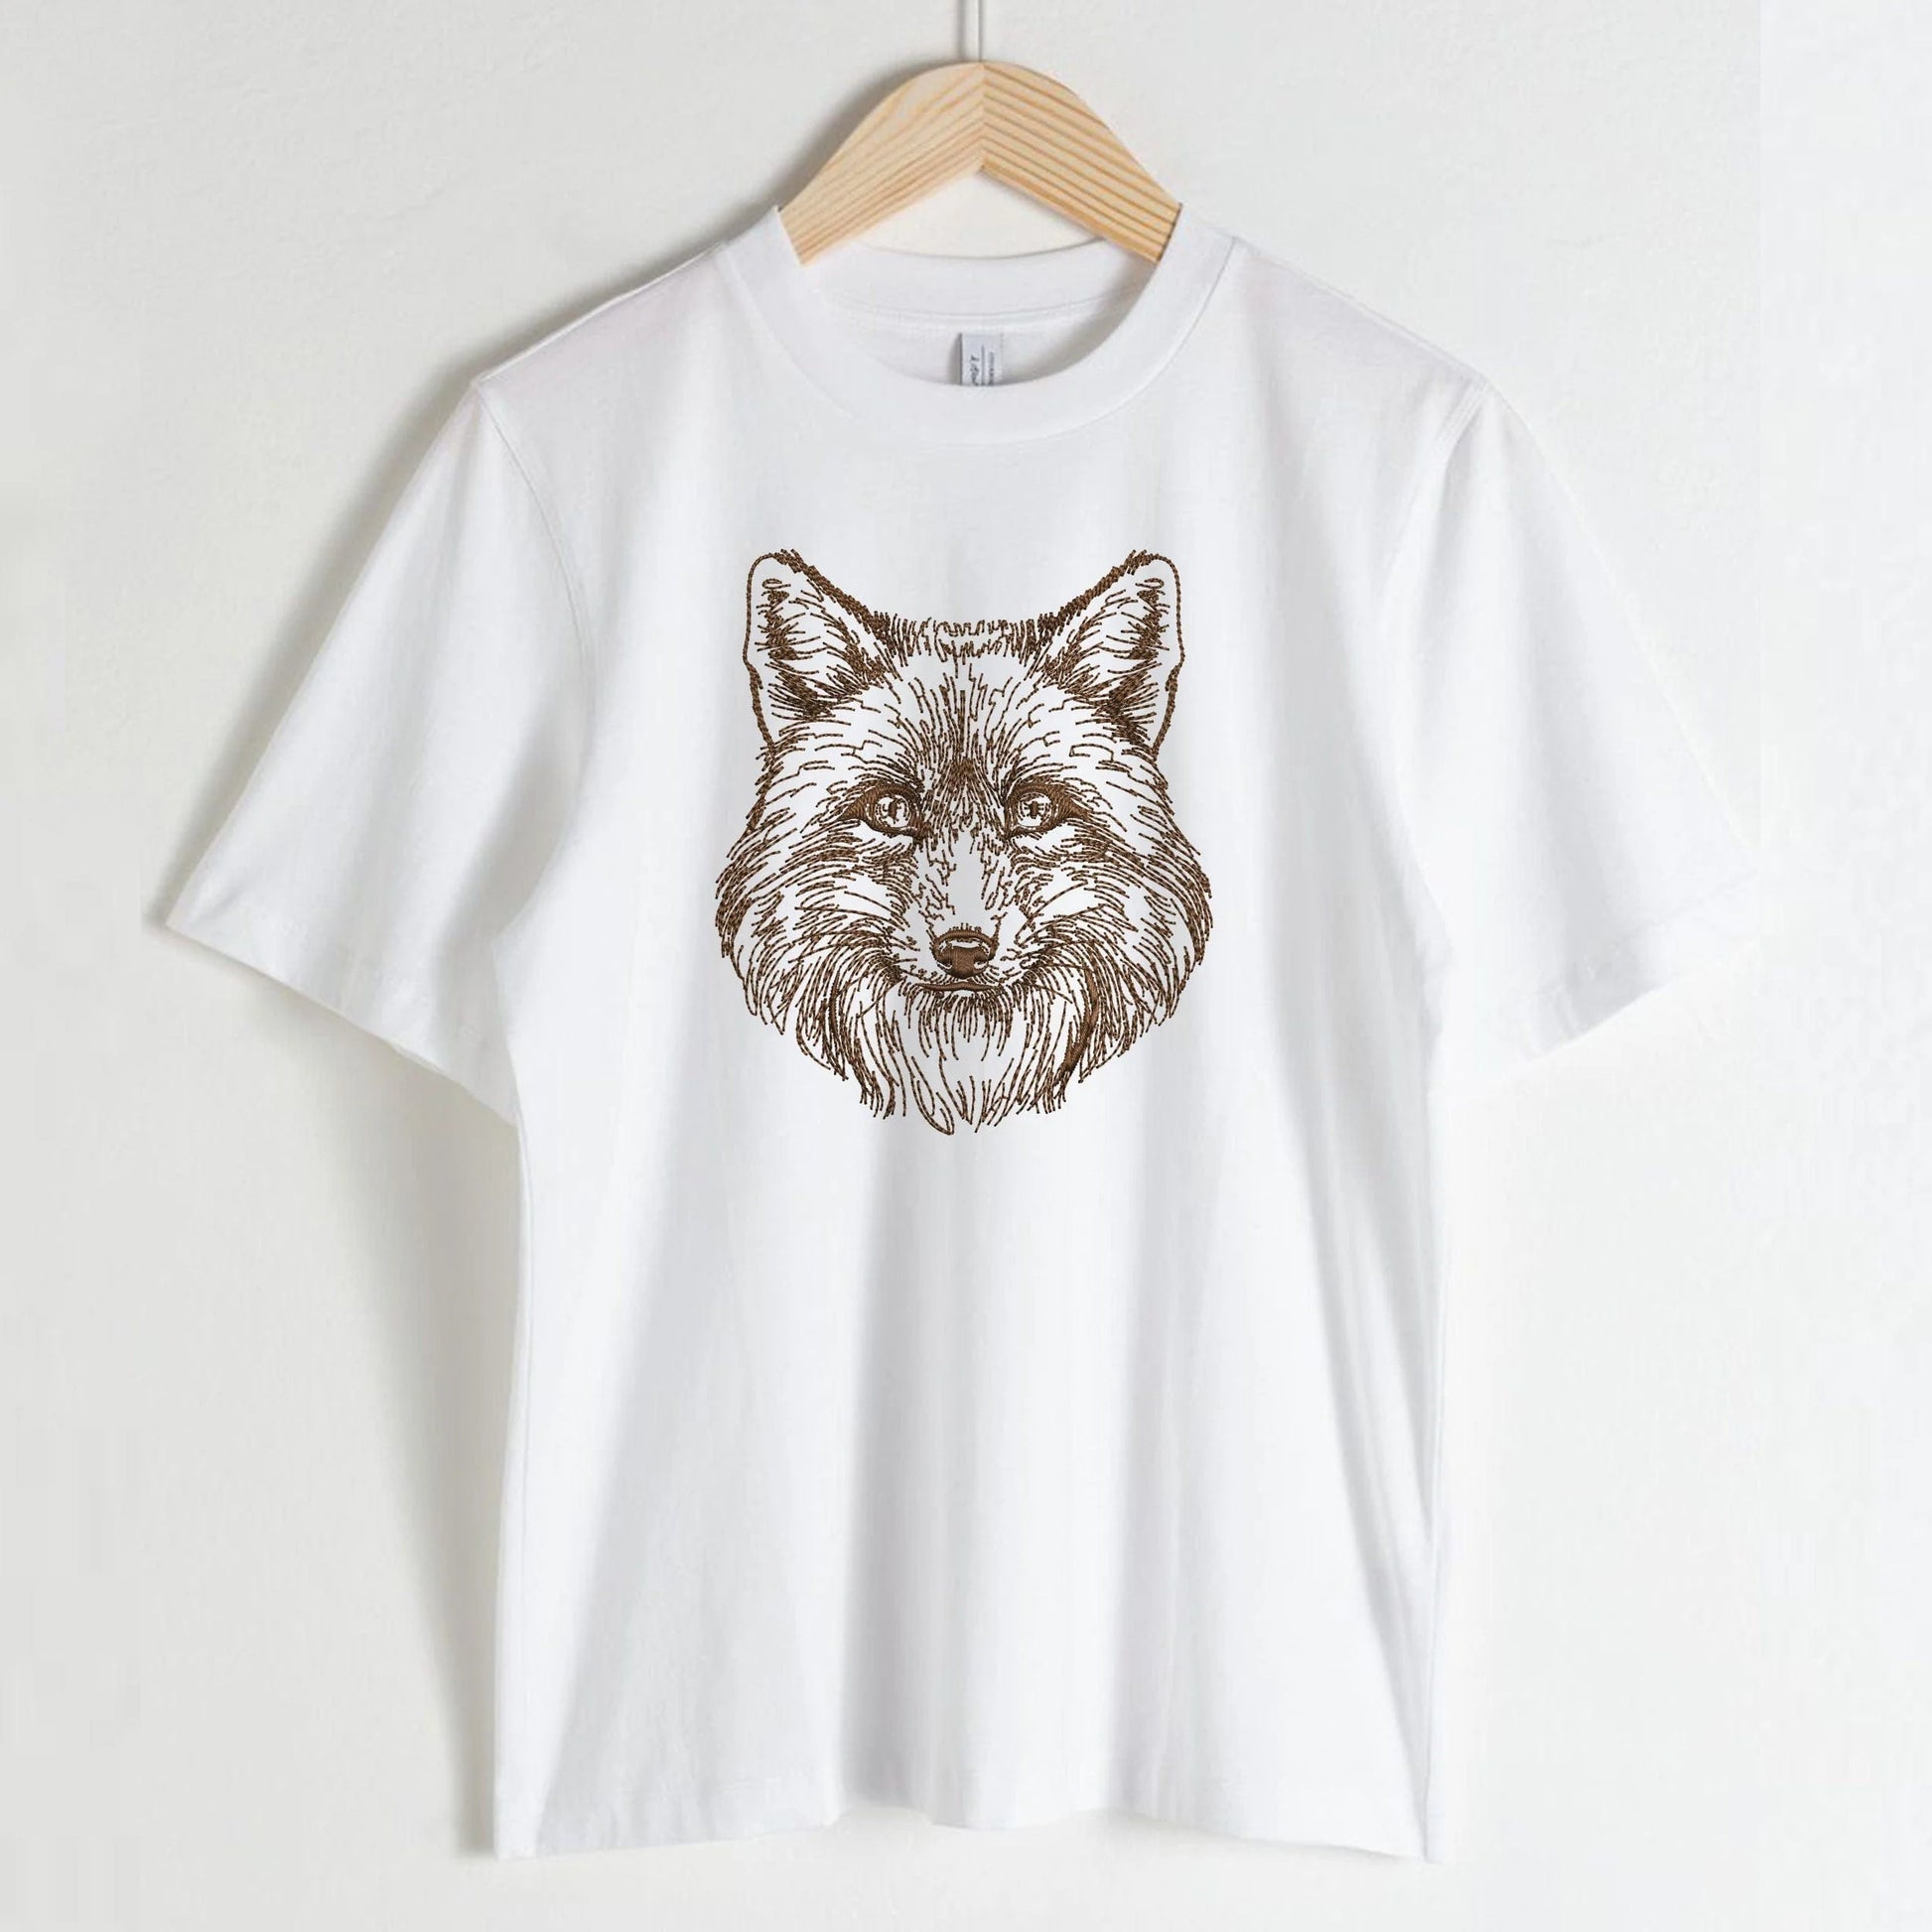 Forest Fox Face Machine Embroidery Design on t-shirt